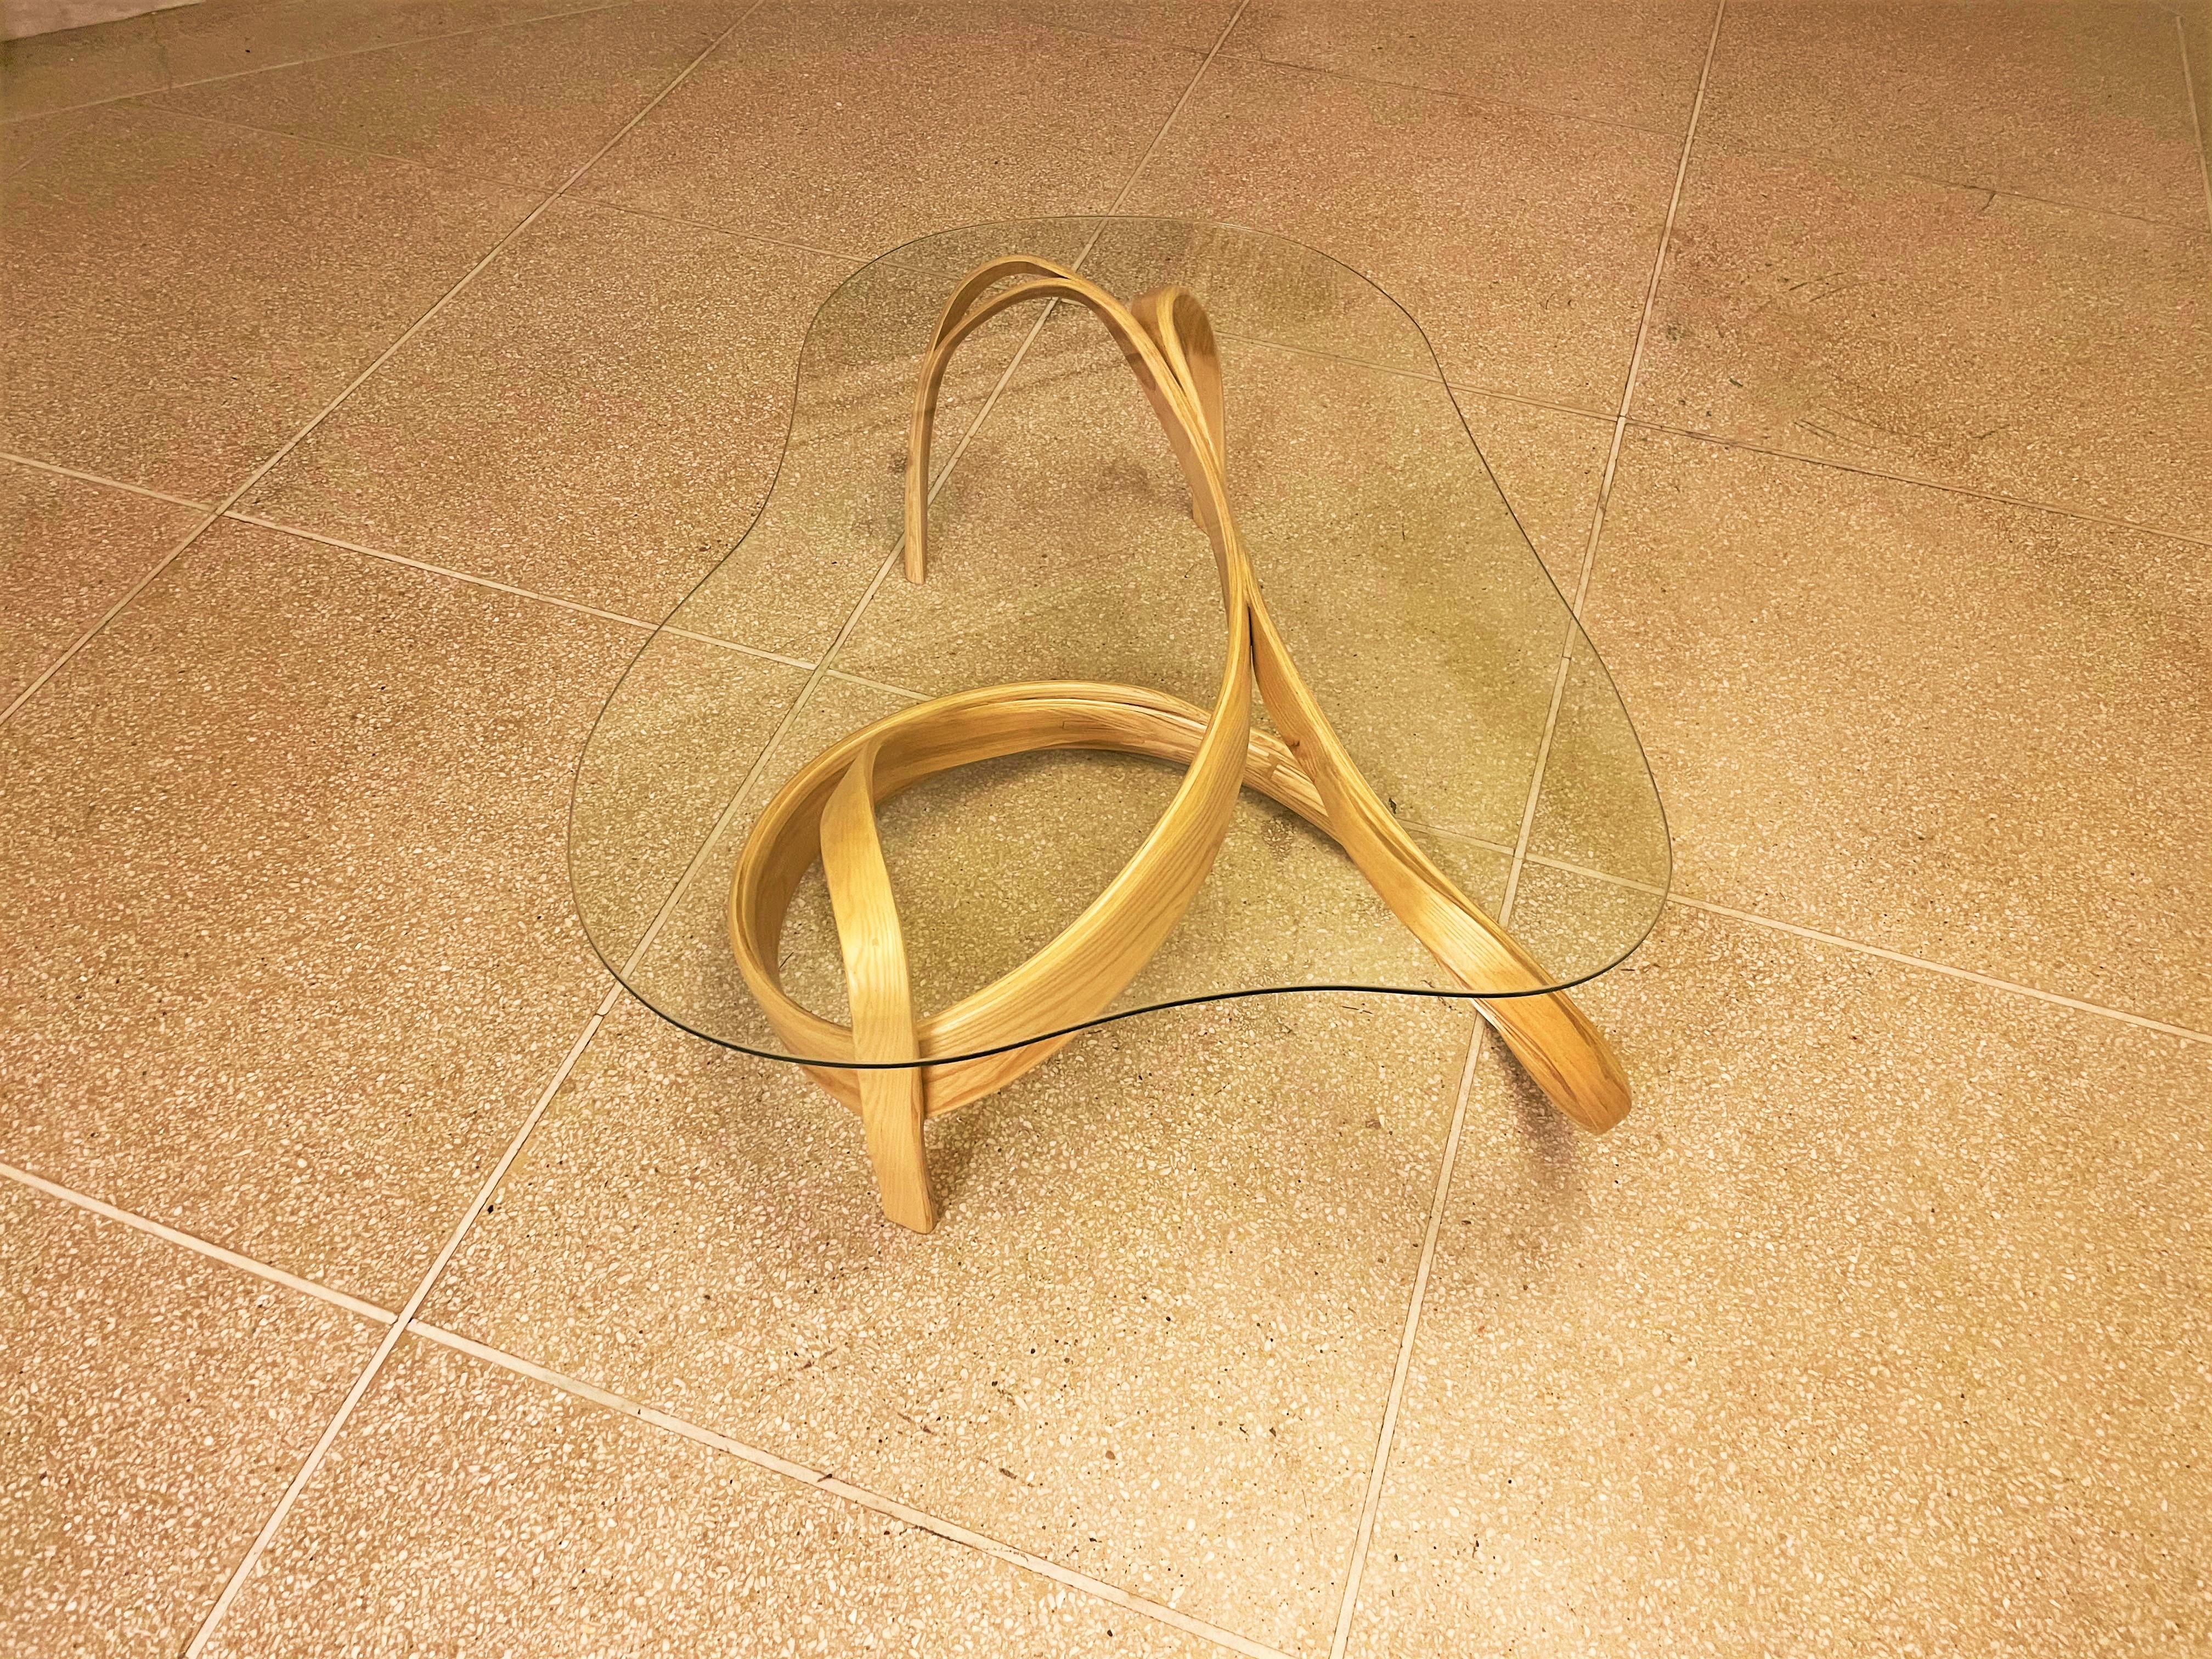 The 101 cocktail table is crafted by bending ash wood to create the base frame which balances a clear glass top which is curved to complement the frame's curves. The continuous flowing wood expands in width; giving the piece a mesmerising